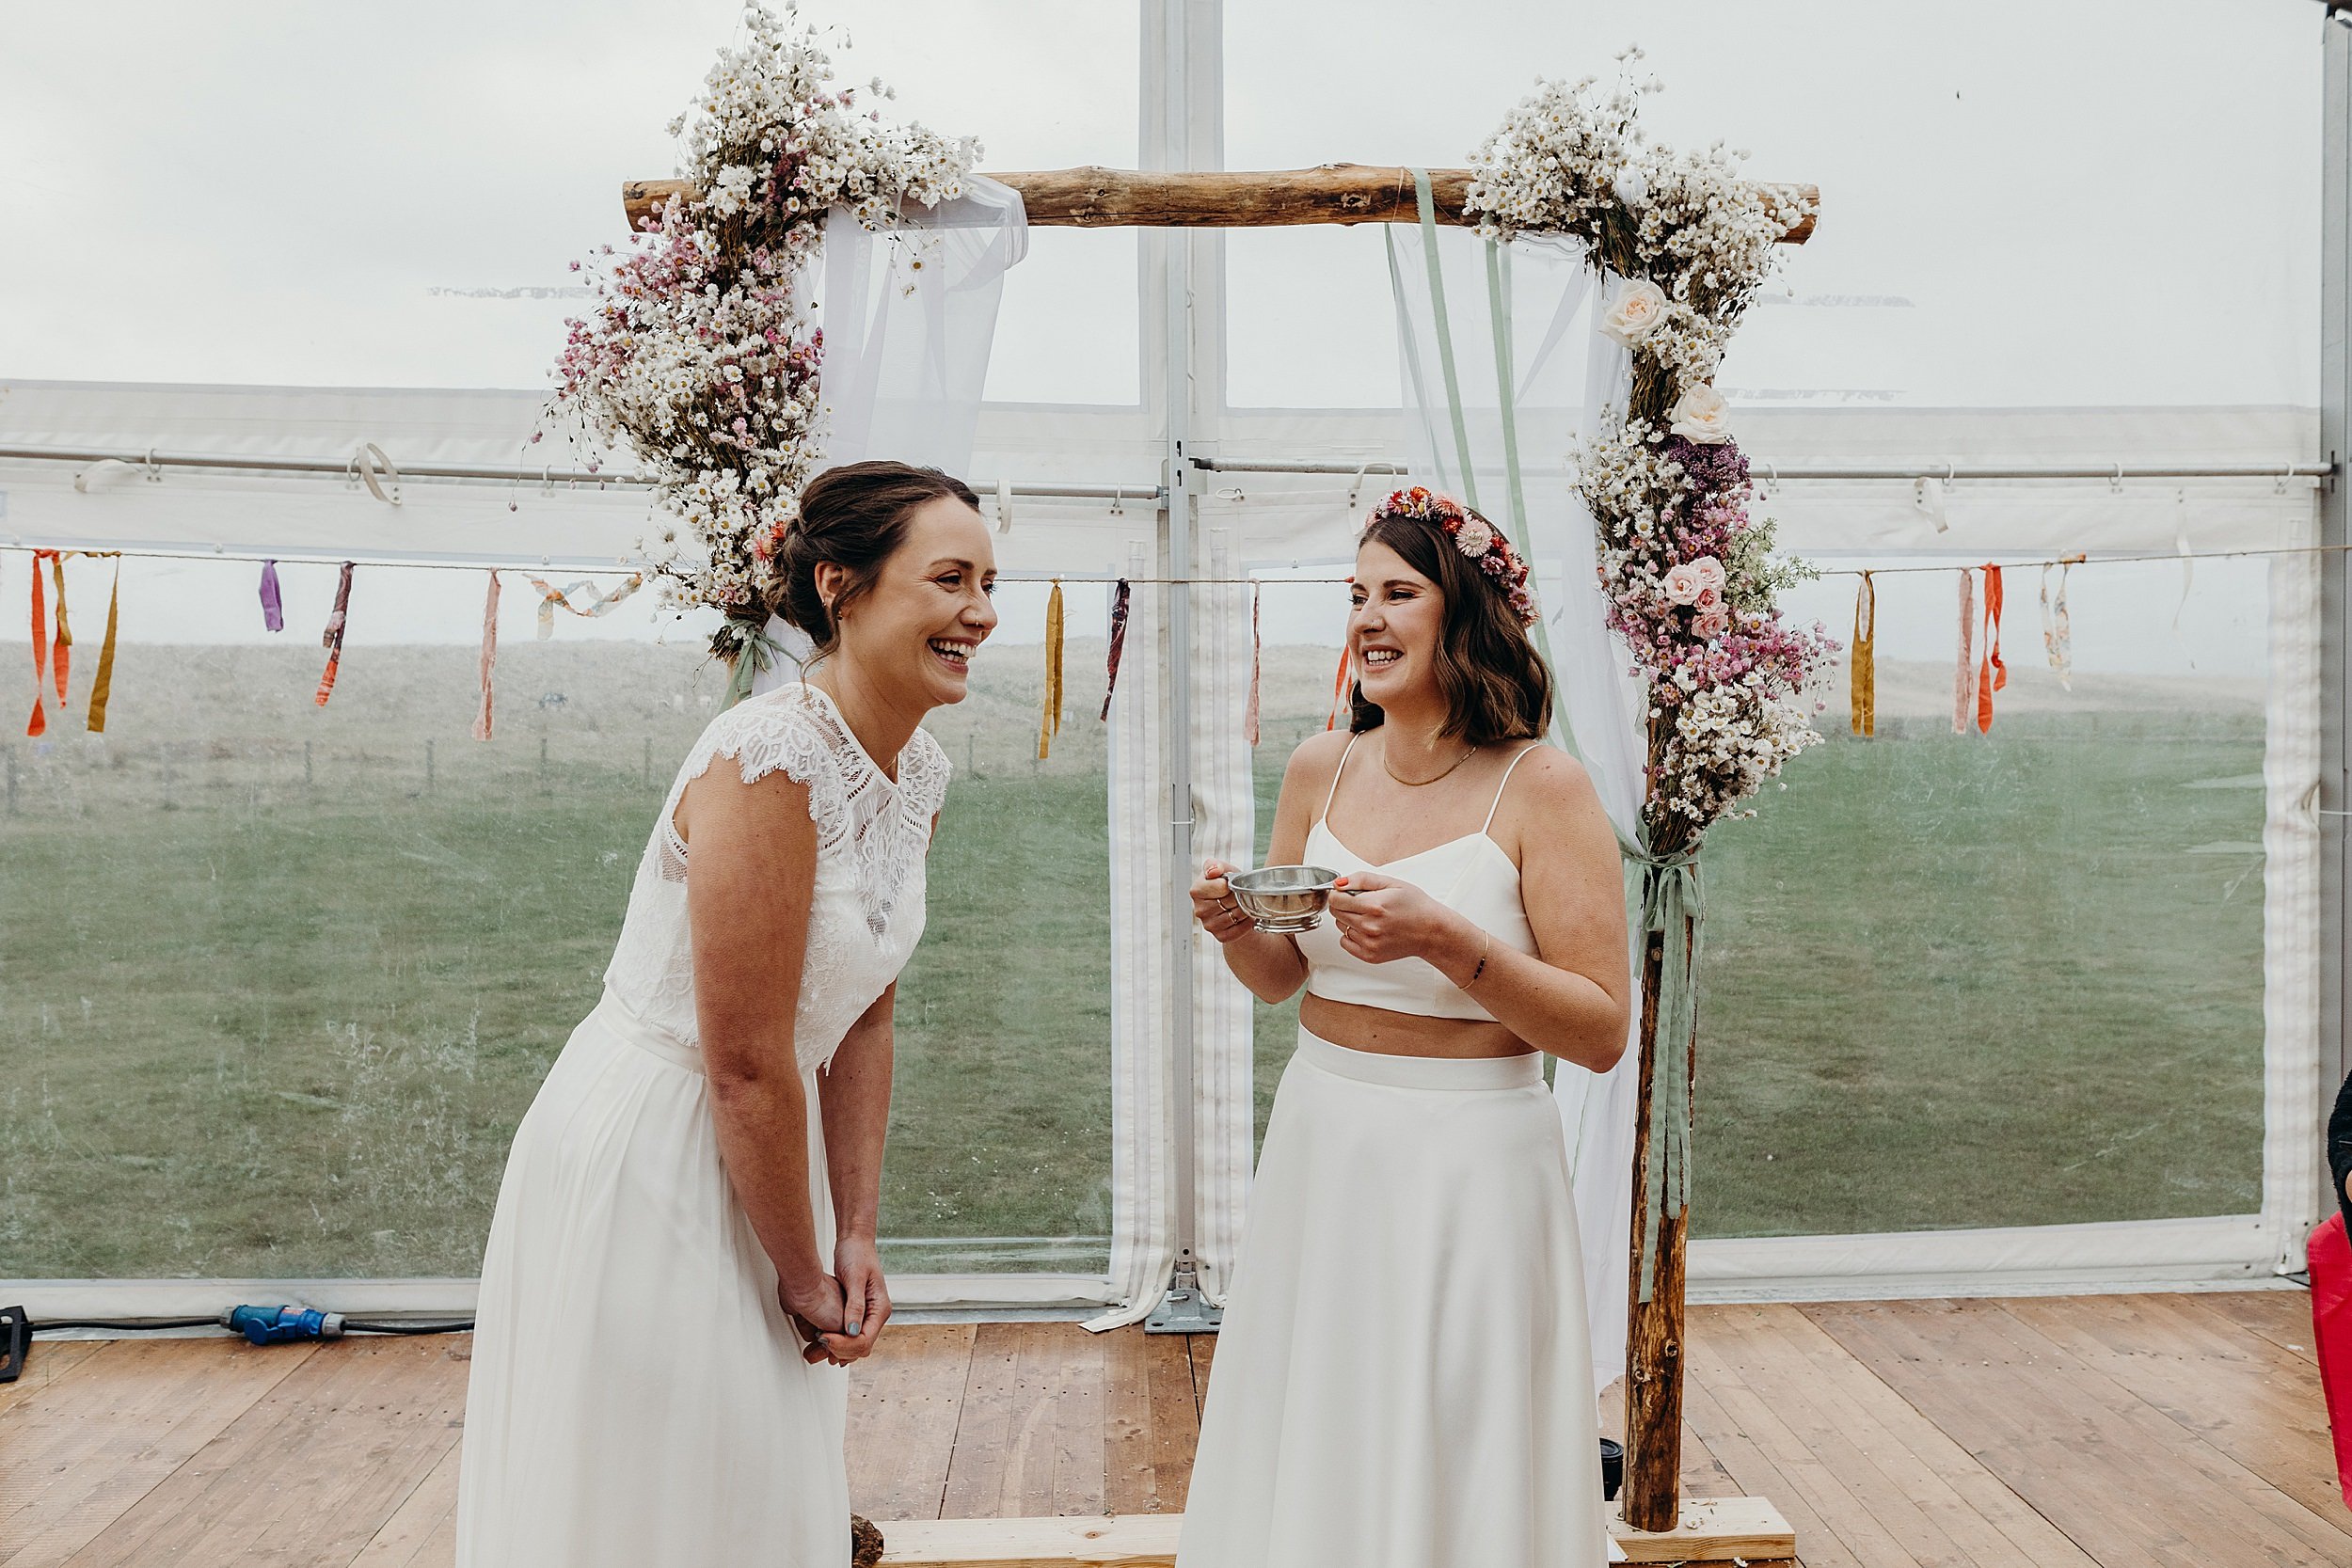 standing on front of a wooden arbour inside a white marquee one bride holds a quaich while the other smiles